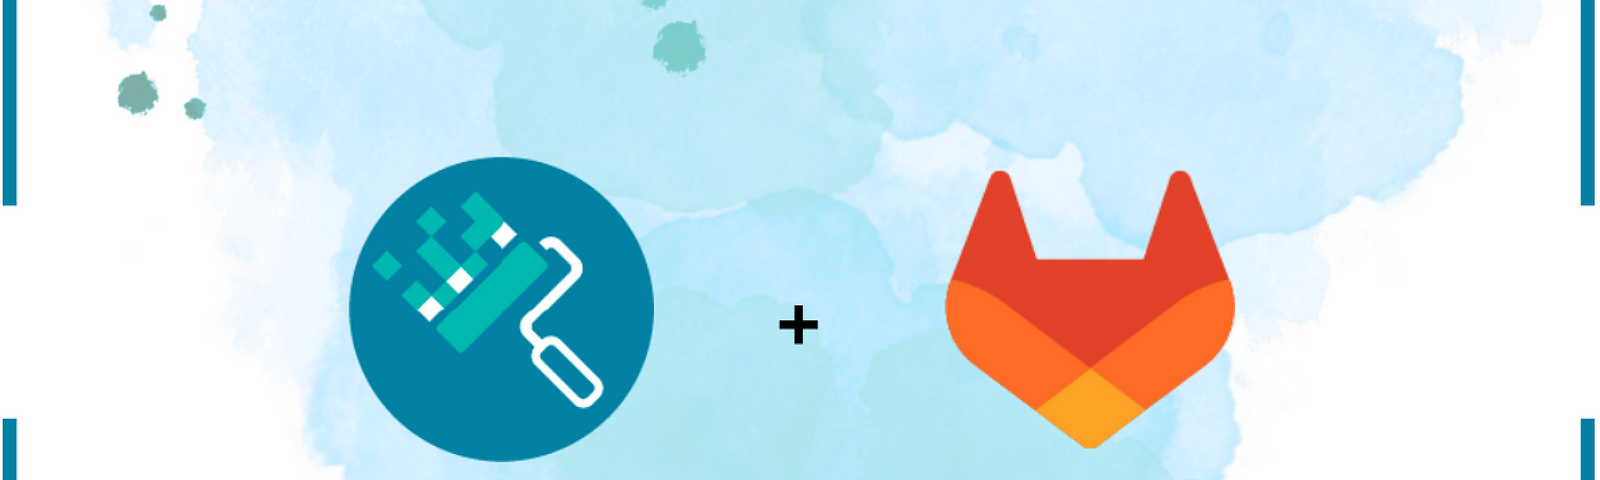 Dependency Management in React Native with Renovate and GitLab